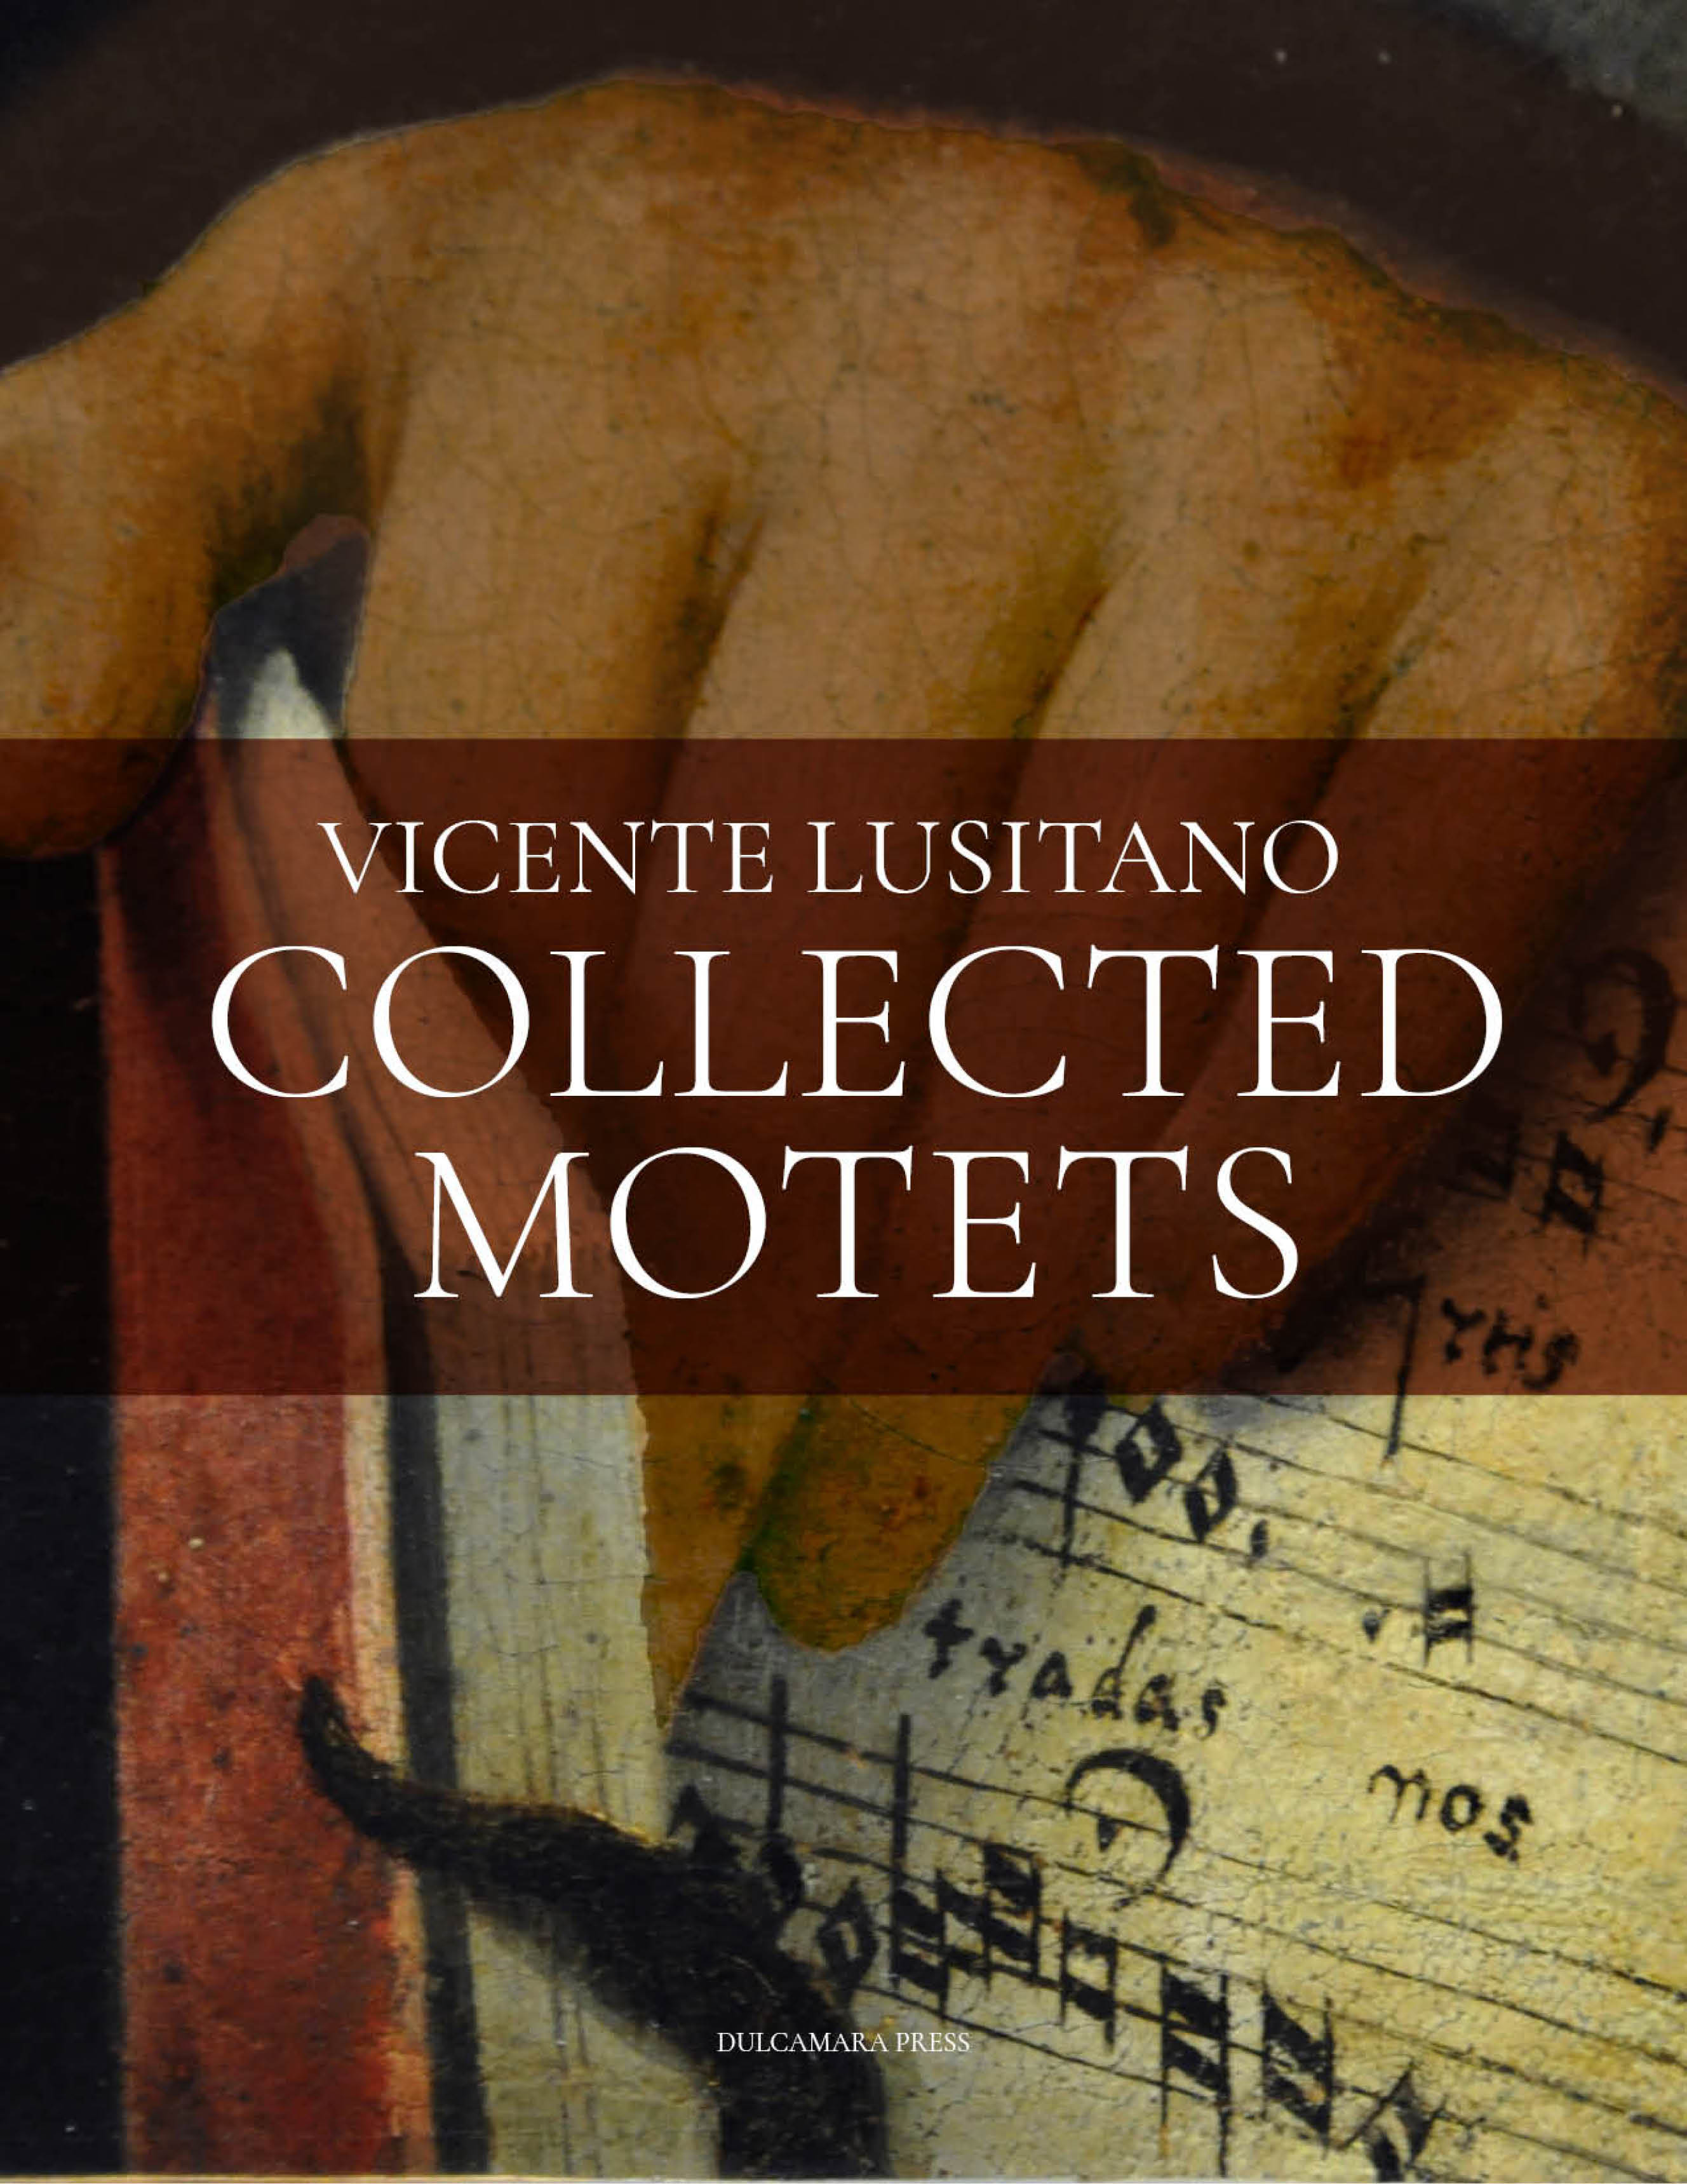 Collected Motets by Vicente Lusitano